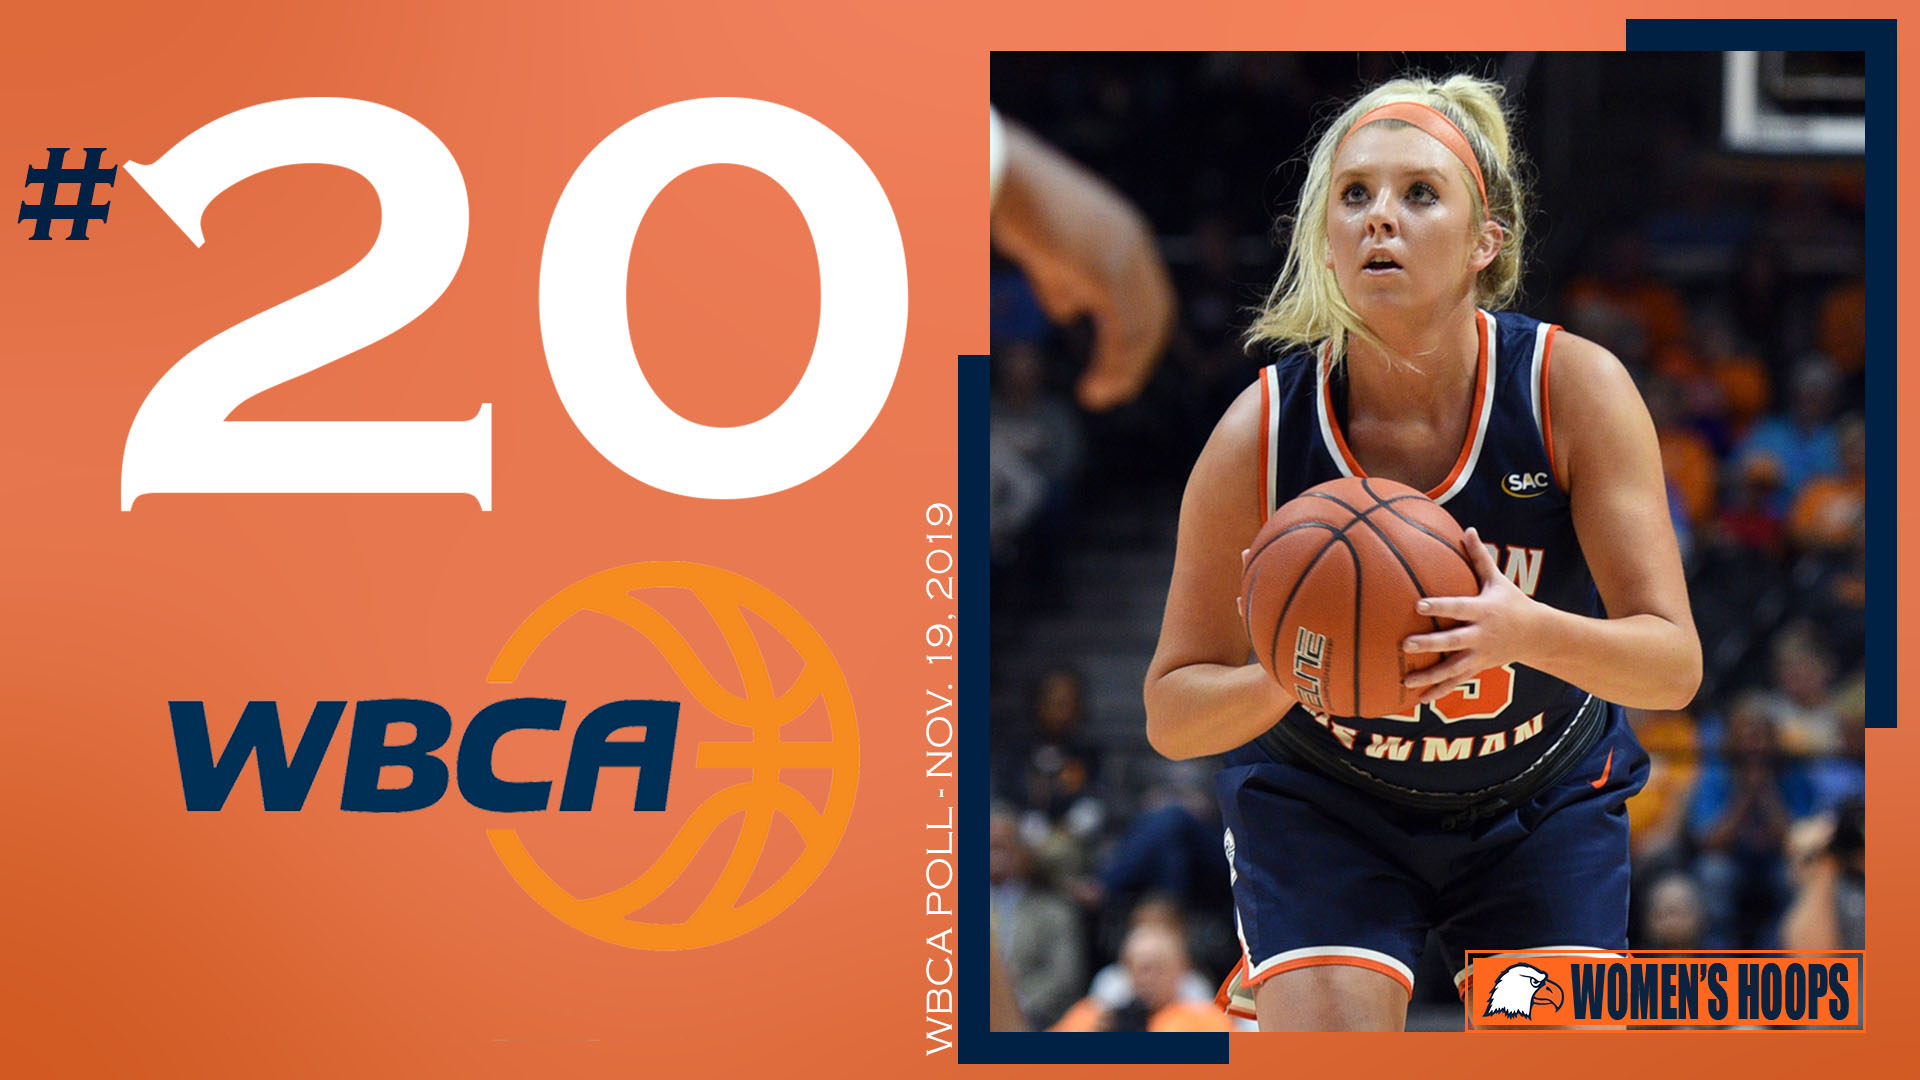 Lady Eagles debut in WBCA poll at No. 20